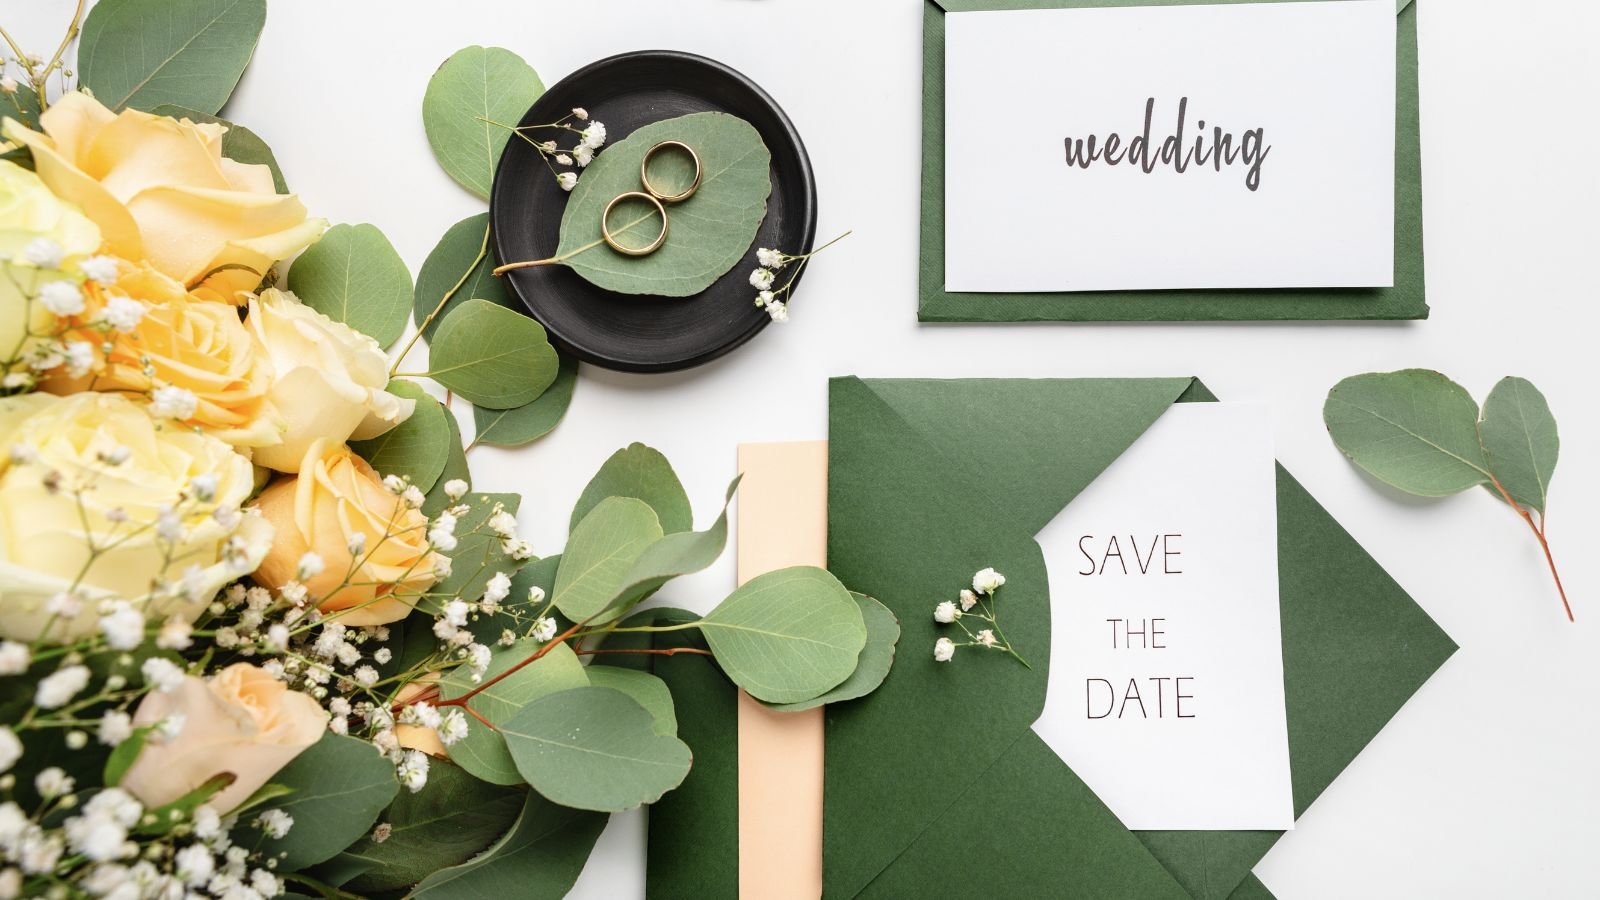 Destination Save the Dates for Weddings, Save The Date Destination Wedding,  Your choice of Quantity and Envelope Color